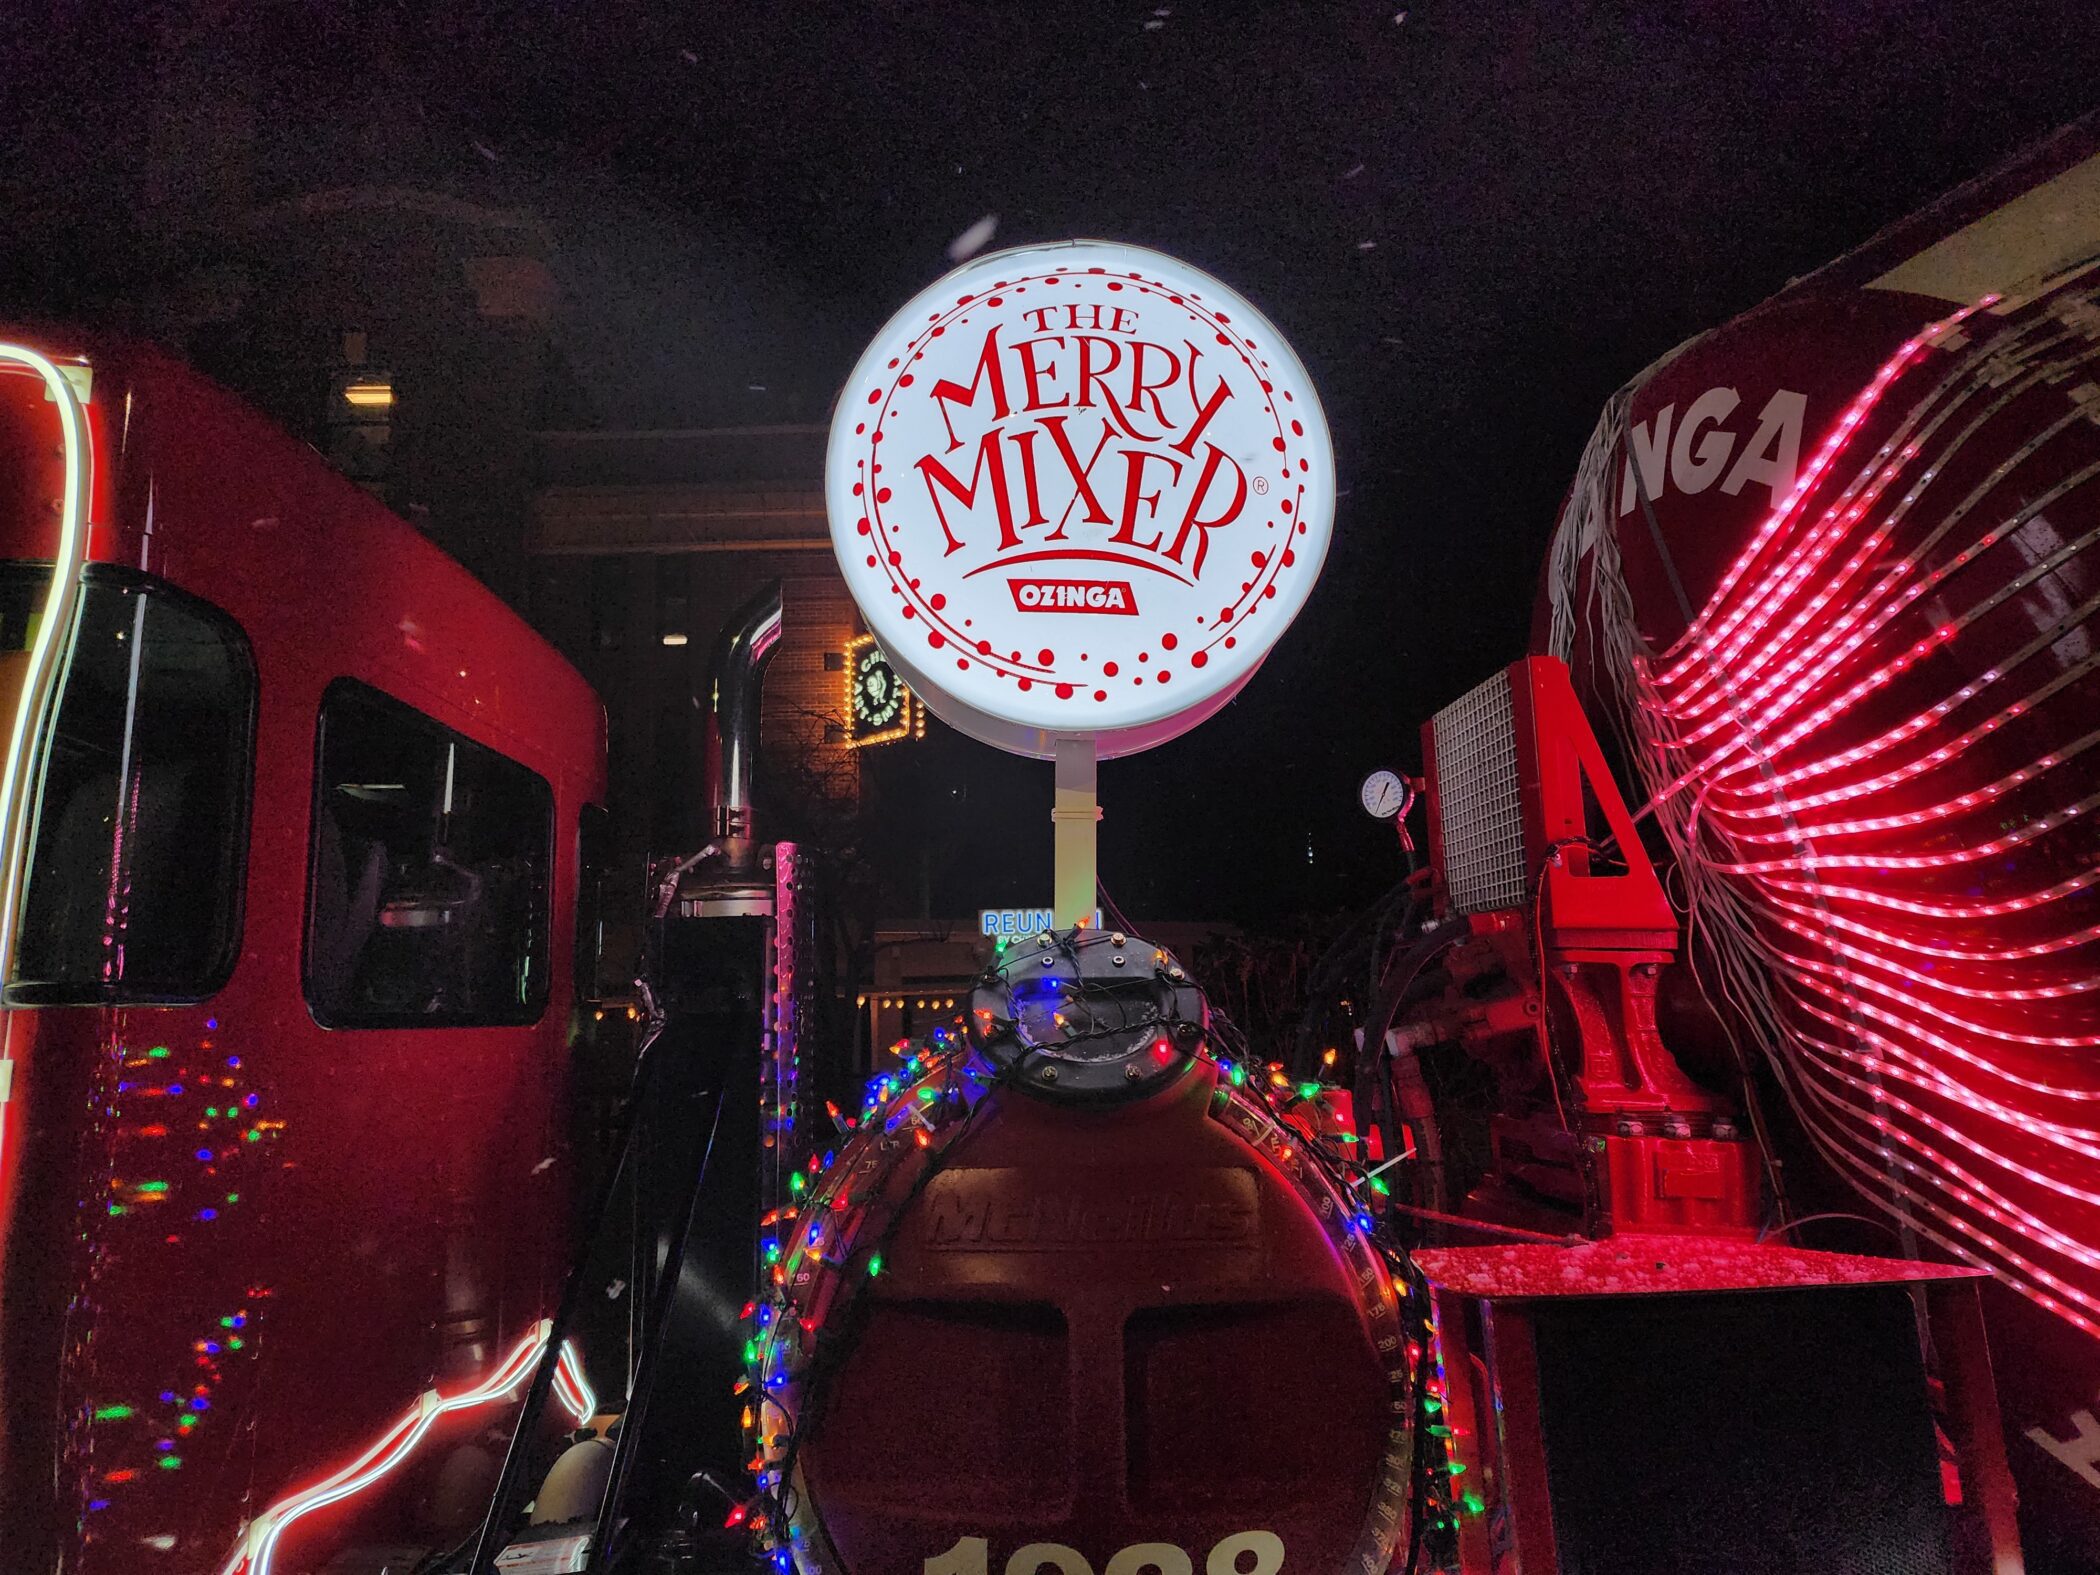 red ozinga holiday truck with white merry mixer sign